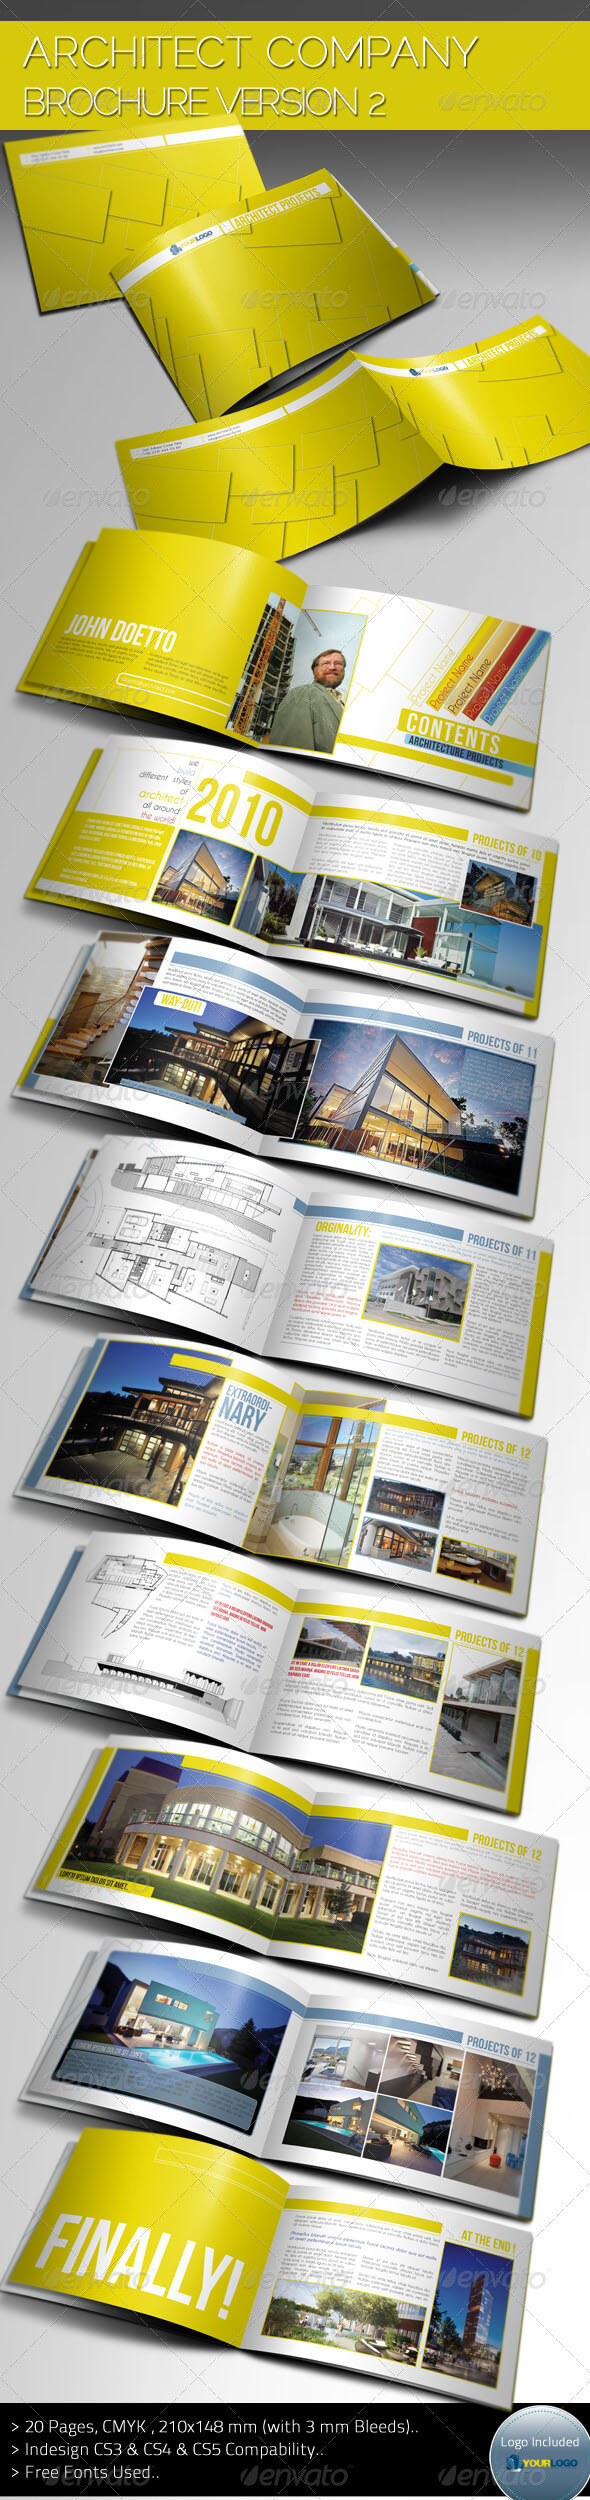 Indesign Brochure Template Graphics, Designs & Templates With Regard To Architecture Brochure Templates Free Download